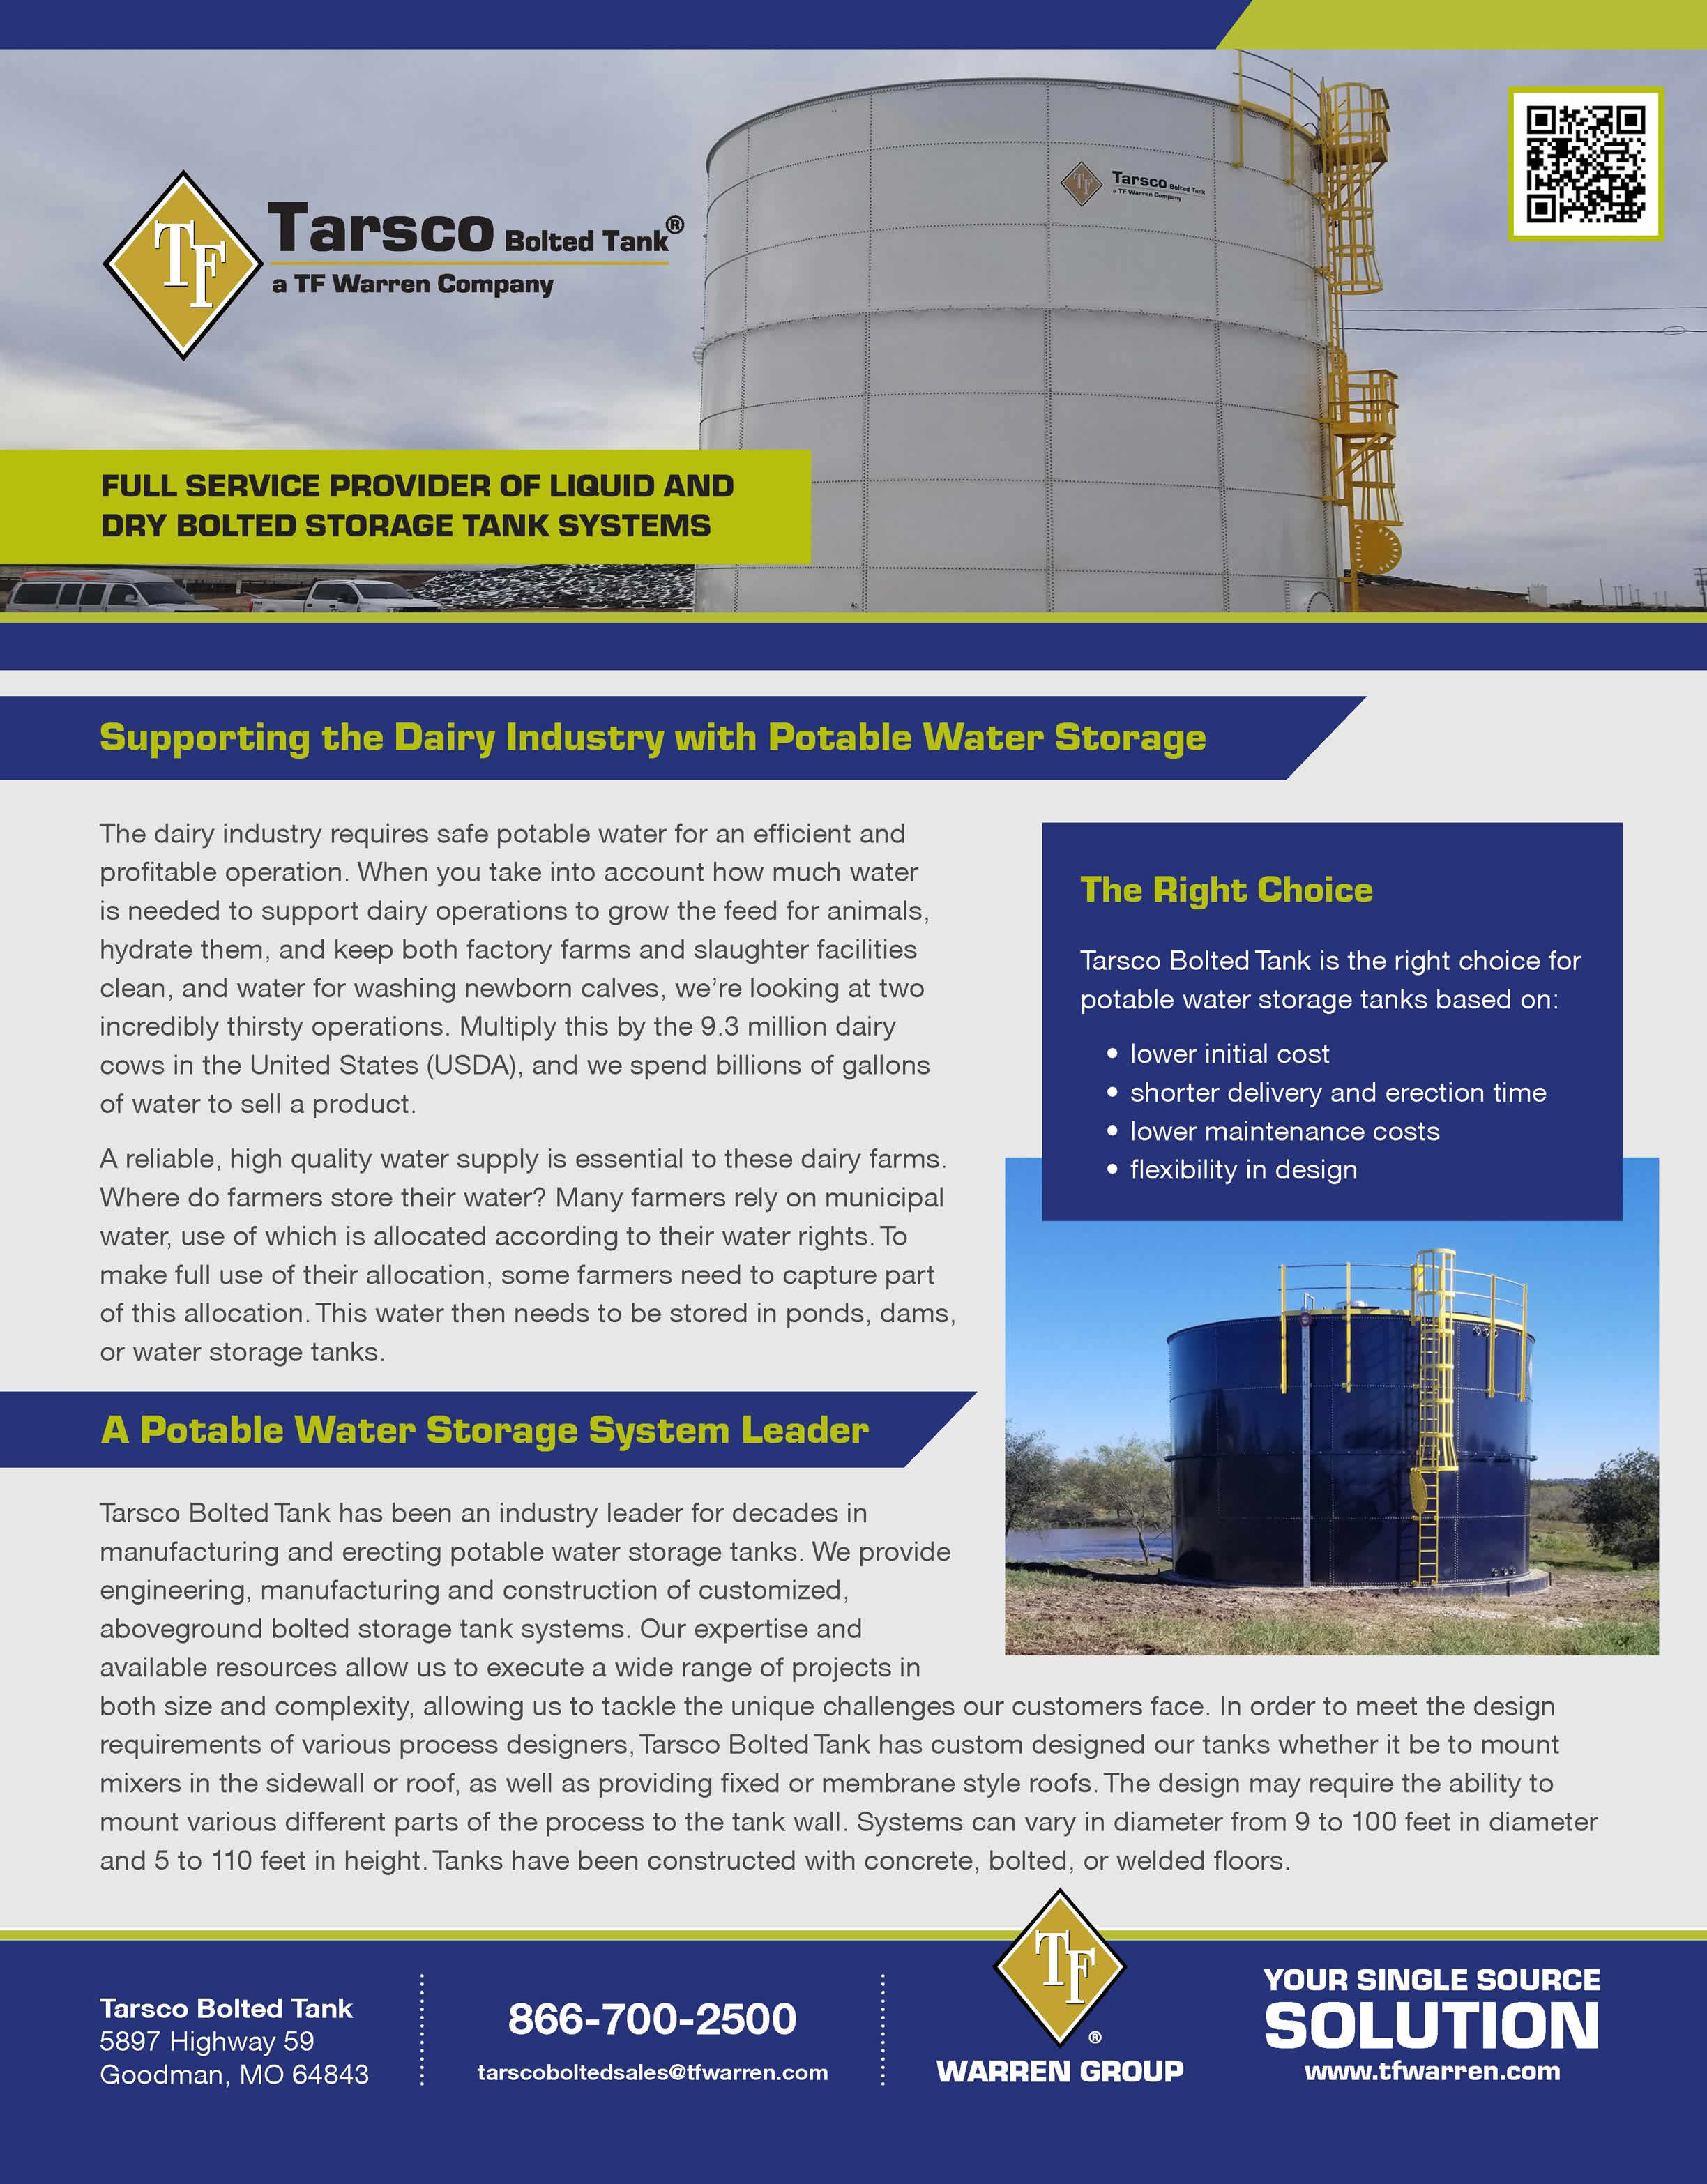 Supporting the Dairy Industry with Potable Water Storage